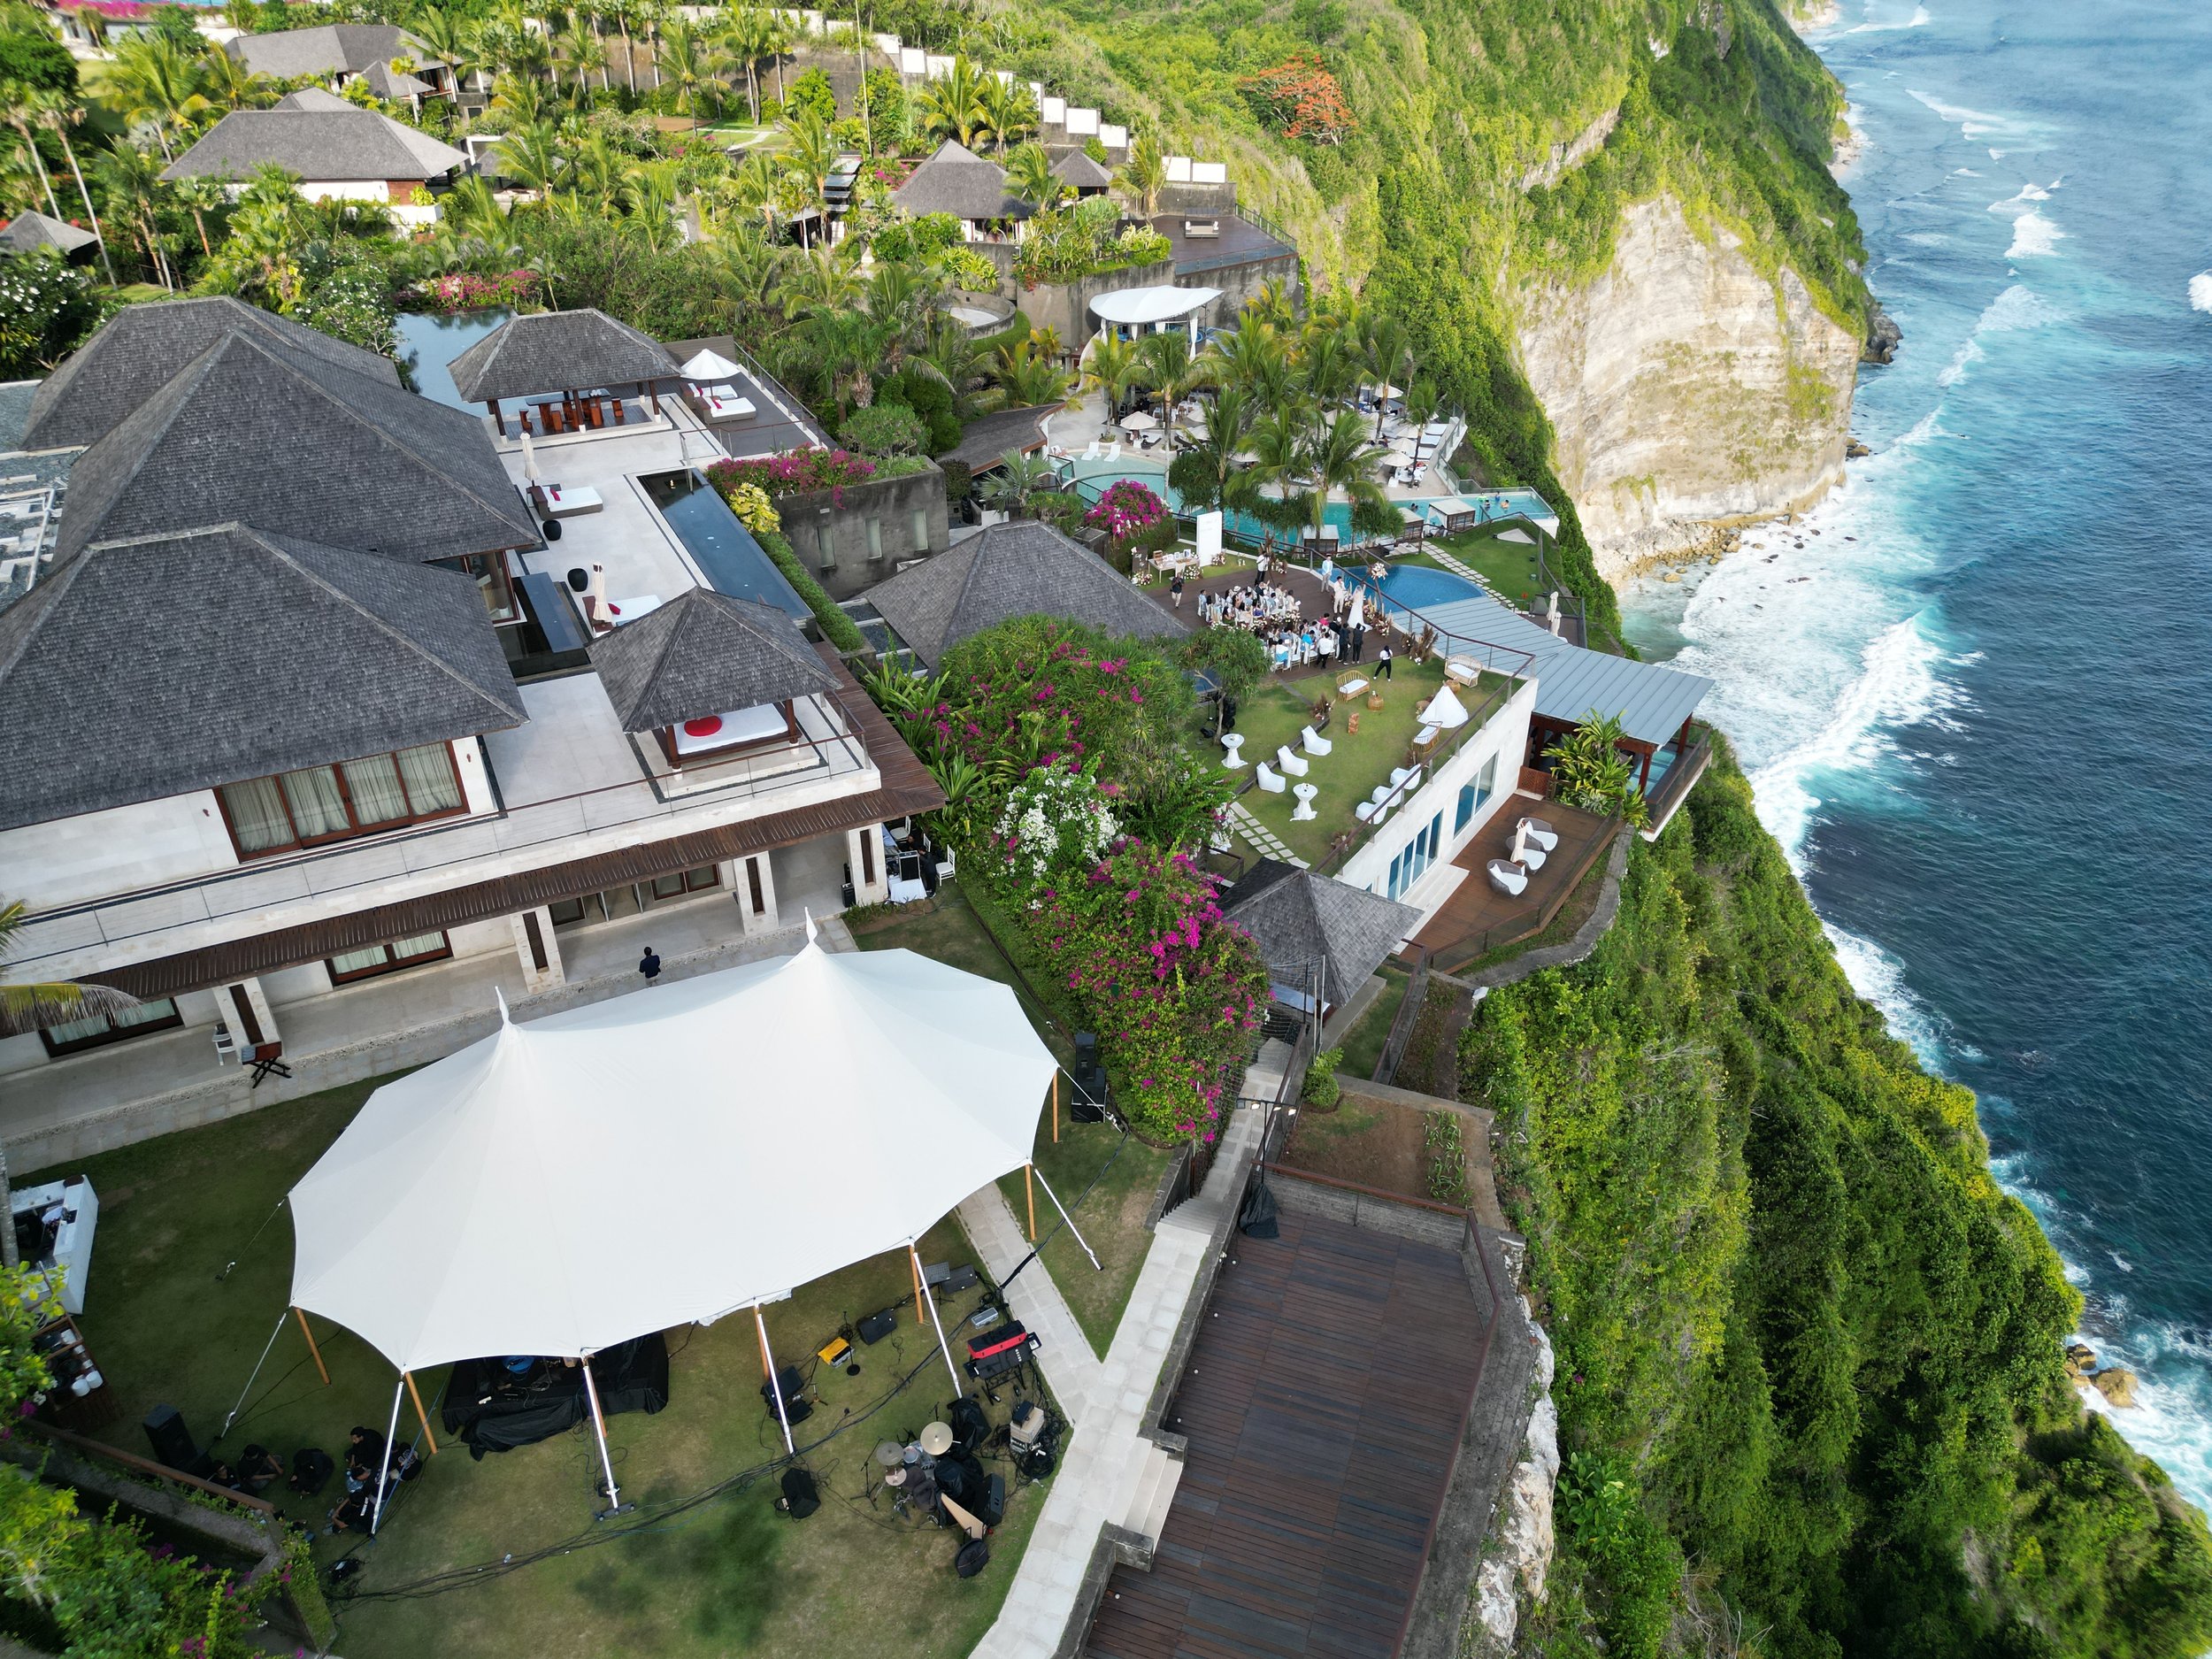 Bali Wedding Venue - The Edge Bali, Image from A Tent in Bali